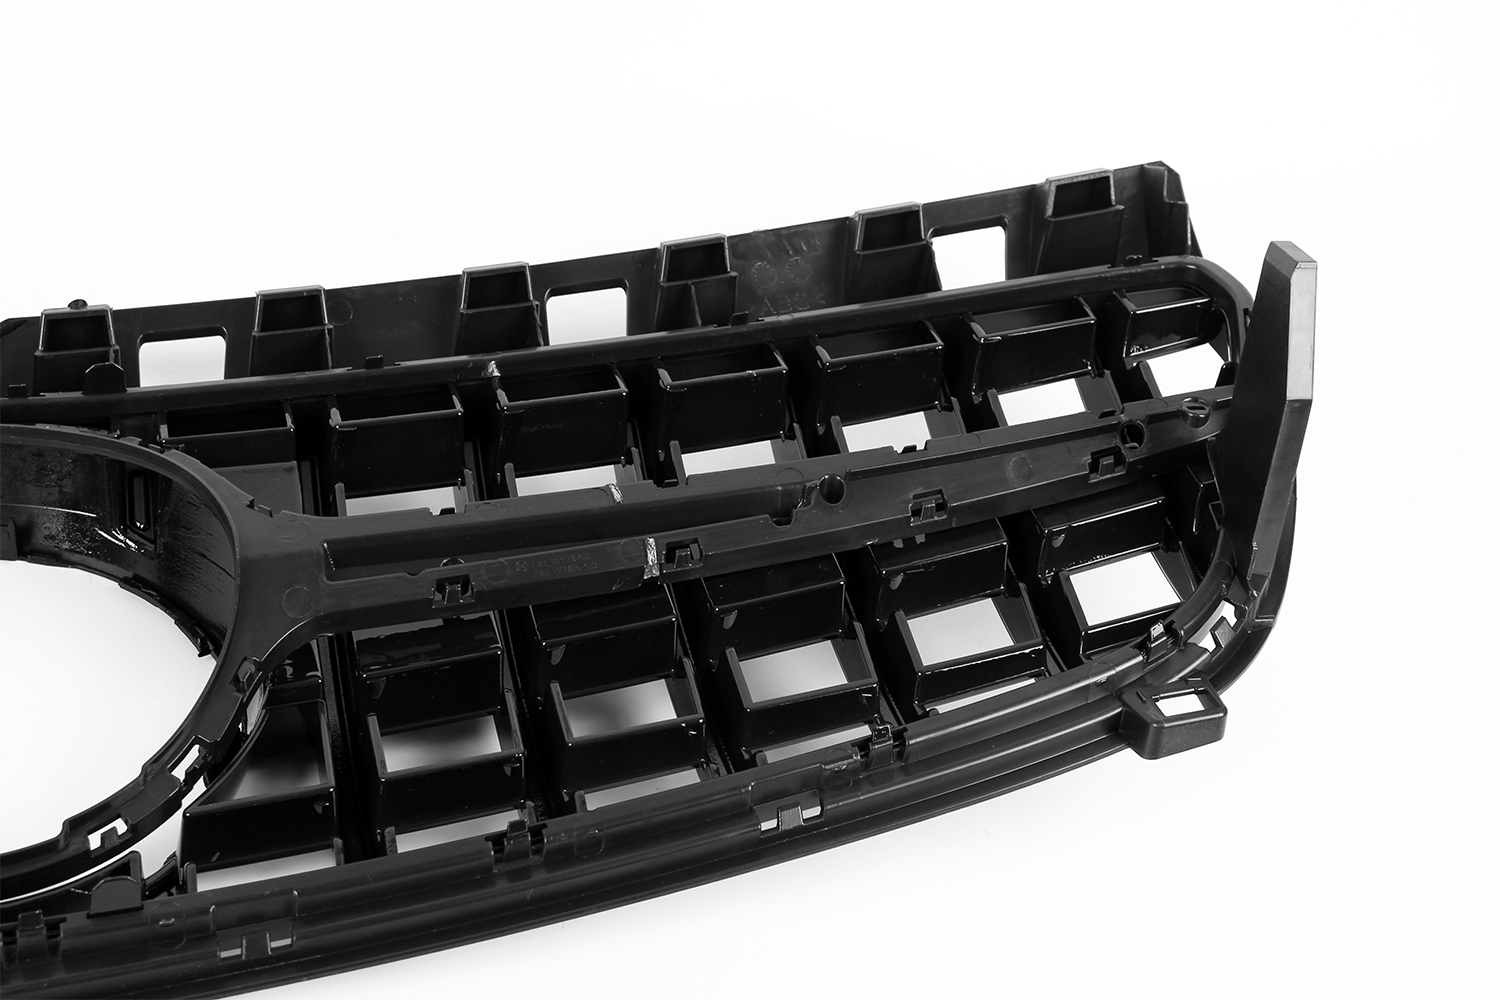 Zero Offset  AMG Panamericana Style Grille for Mercedes A Class W176 13-15 - Black - MODE Auto Concepts